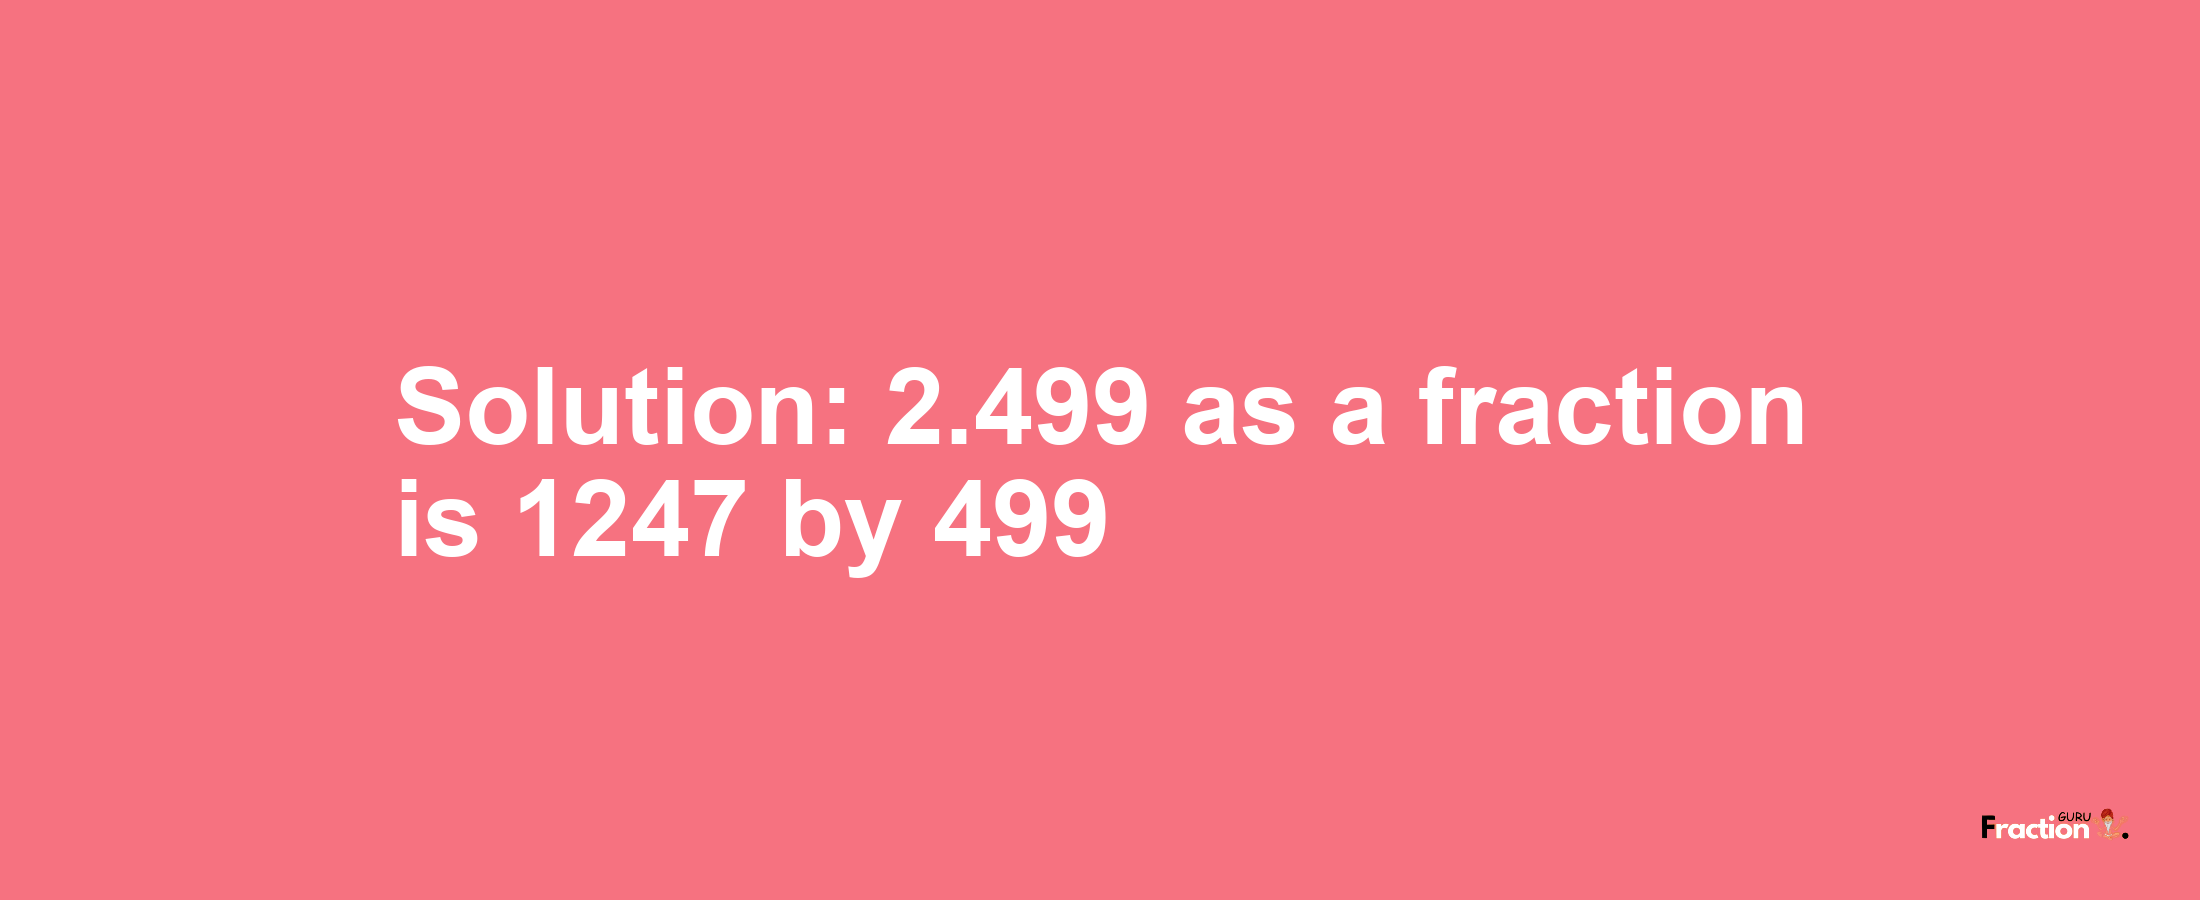 Solution:2.499 as a fraction is 1247/499